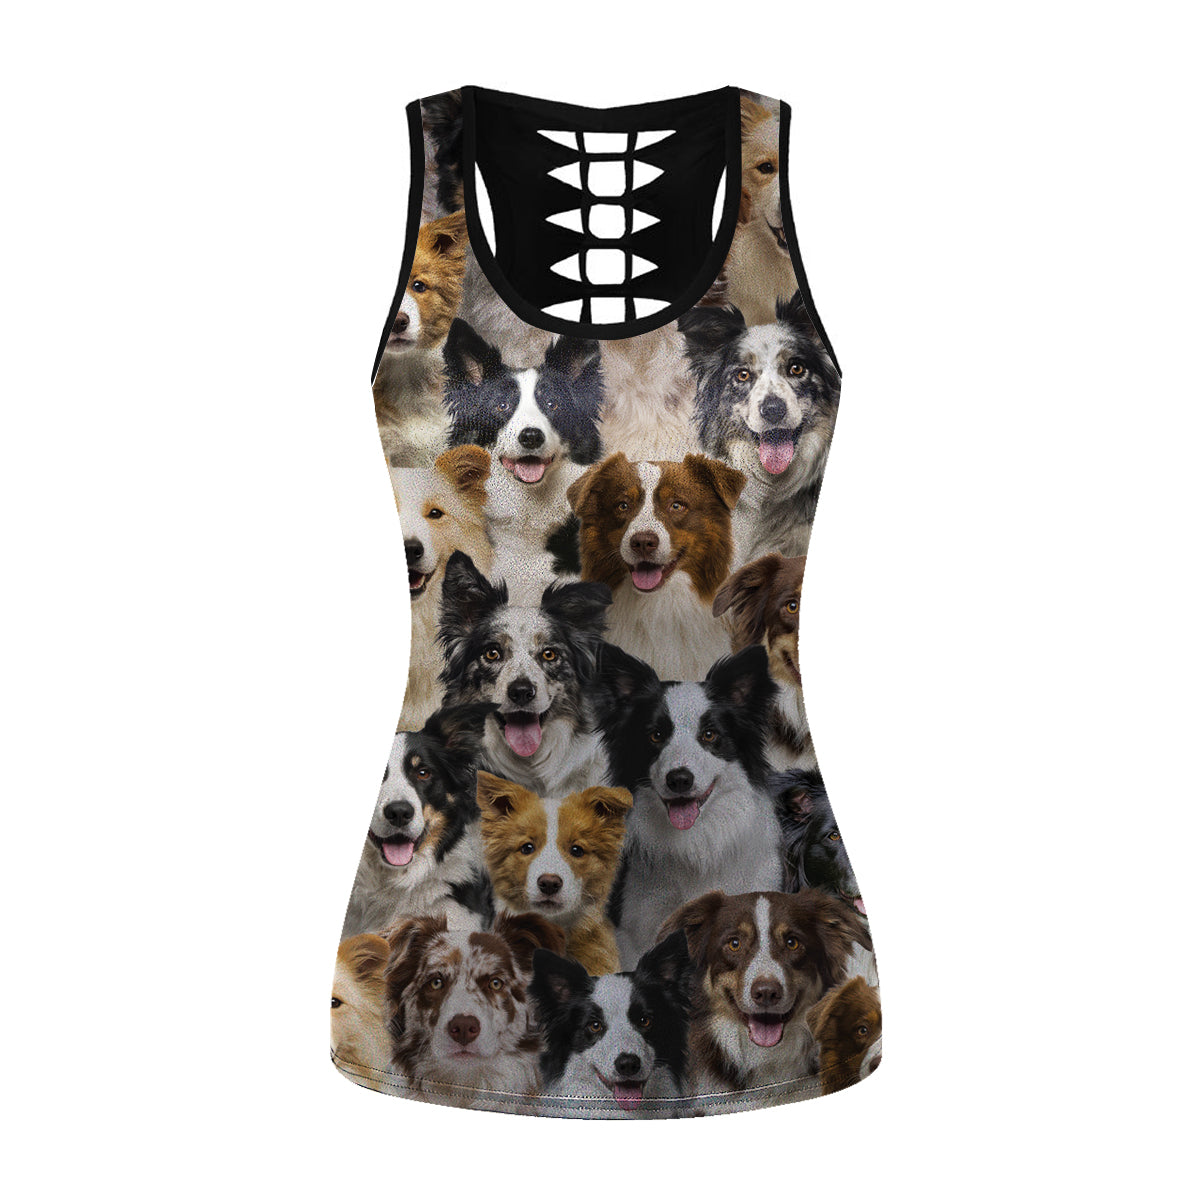 You Will Have A Bunch Of Border Collies - Hollow Tank Top V1